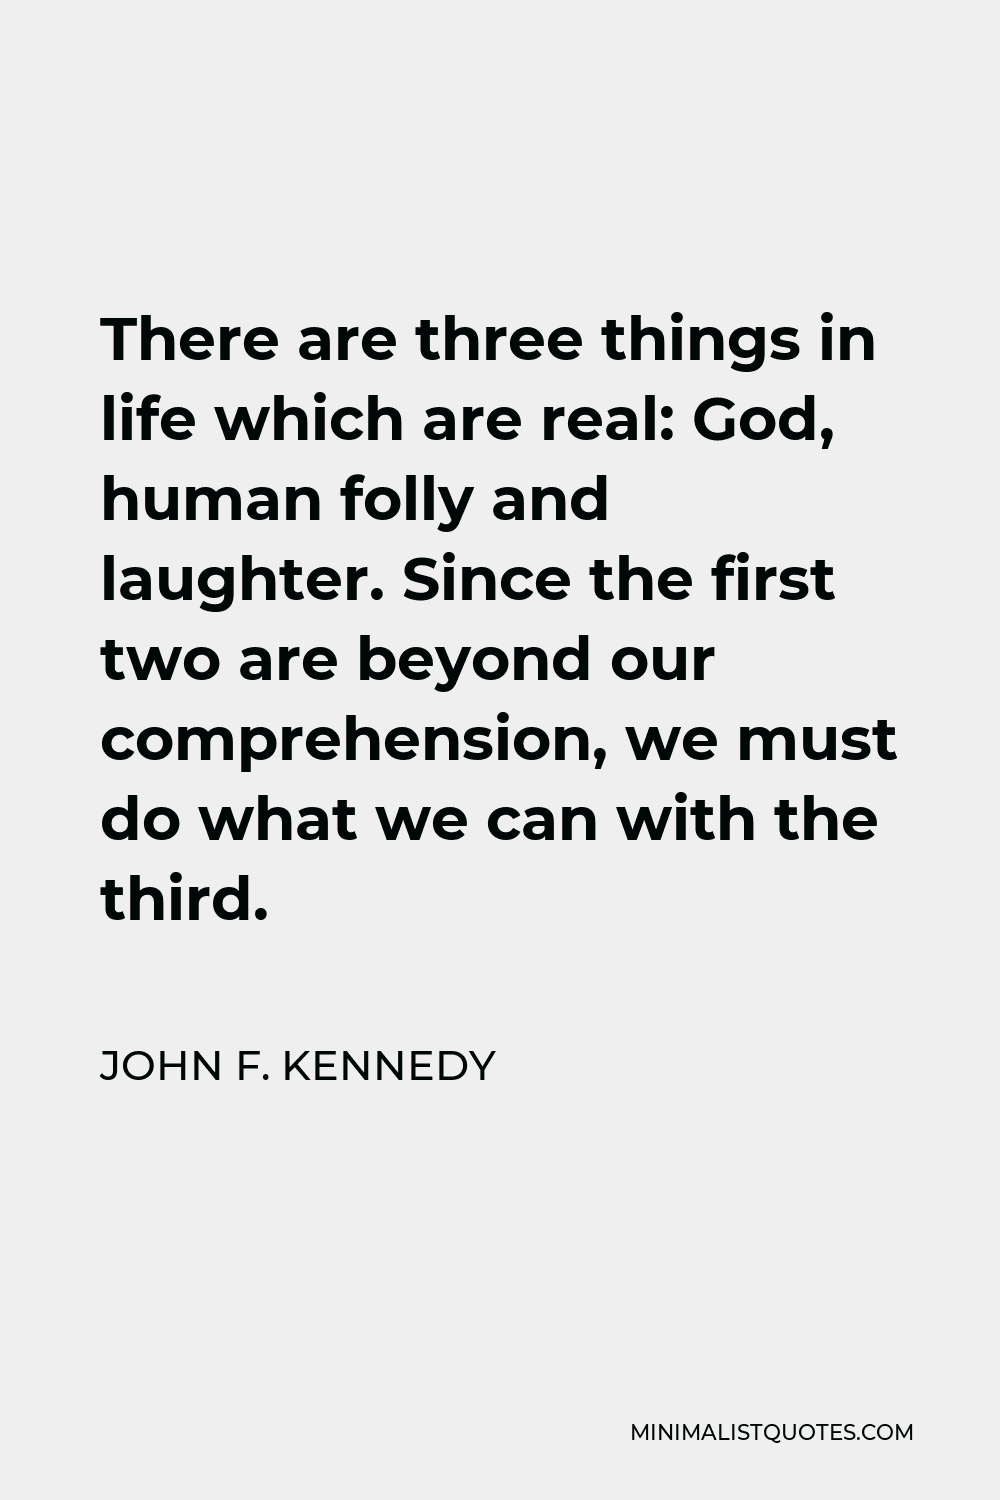 John F. Kennedy Quote - There are three things in life which are real: God, human folly and laughter. Since the first two are beyond our comprehension, we must do what we can with the third.